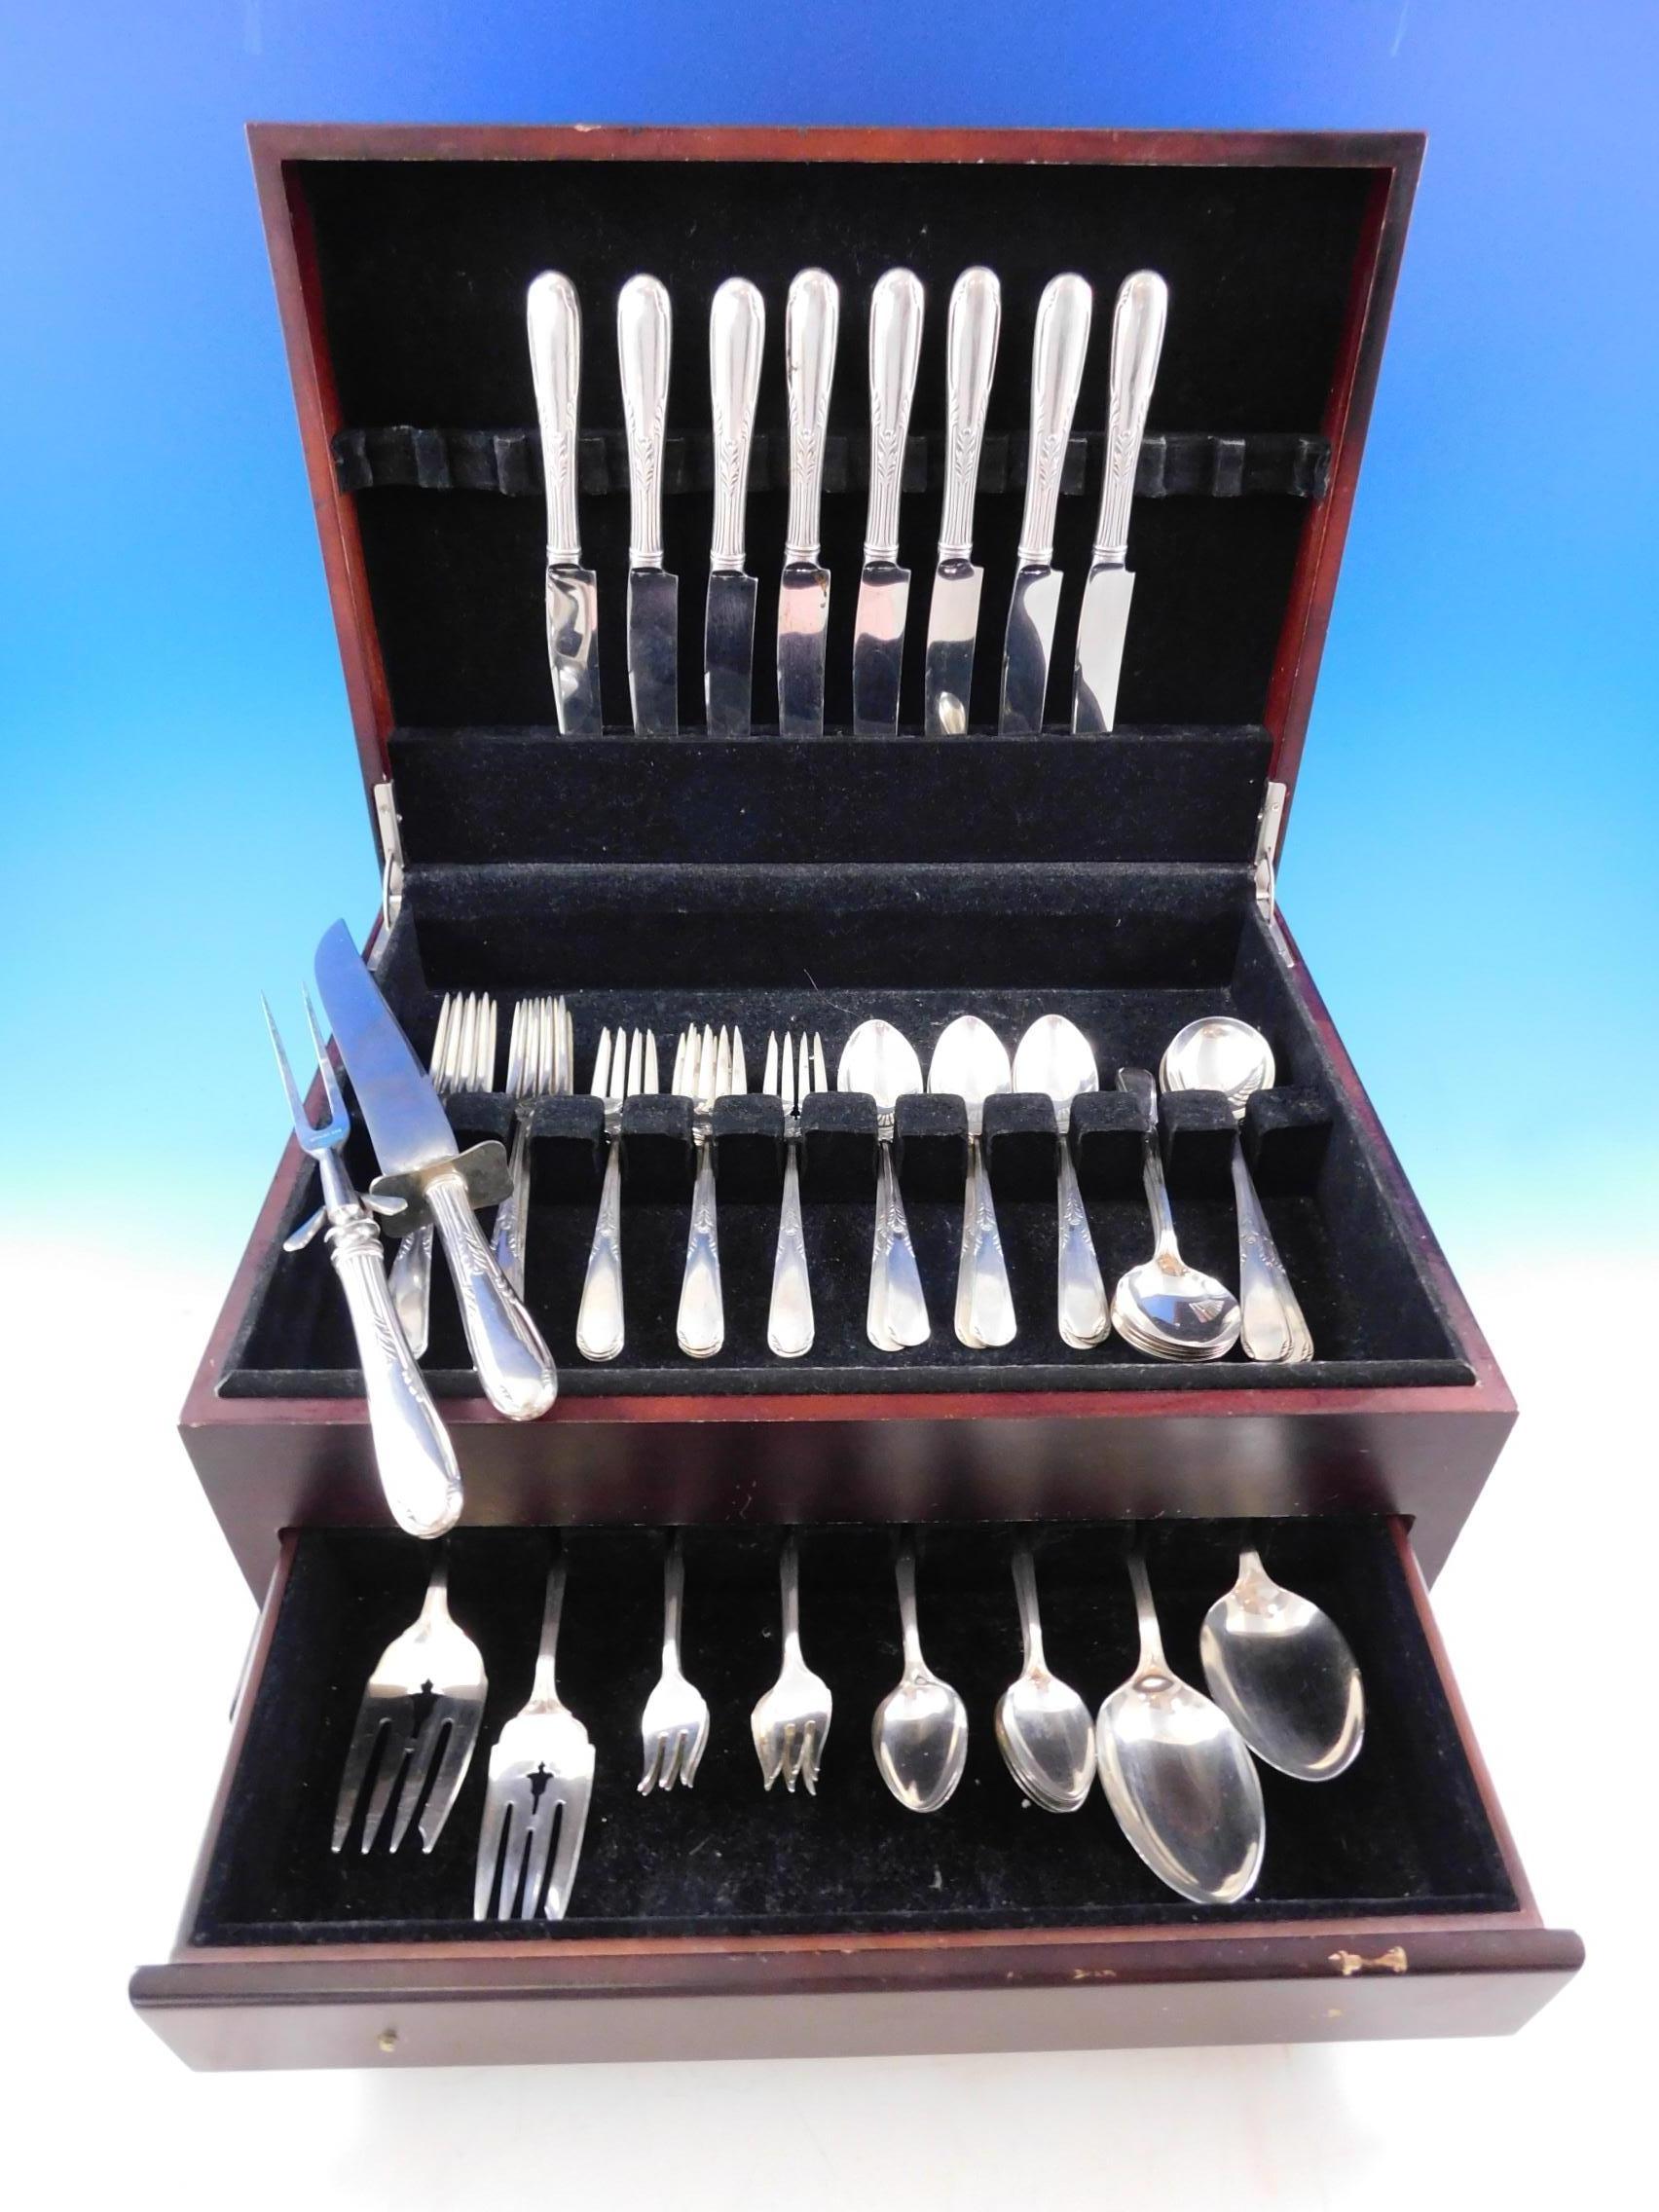 Fleetwood by Manchester sterling silver flatware set - 62 pieces. This set includes:

8 knives, 9